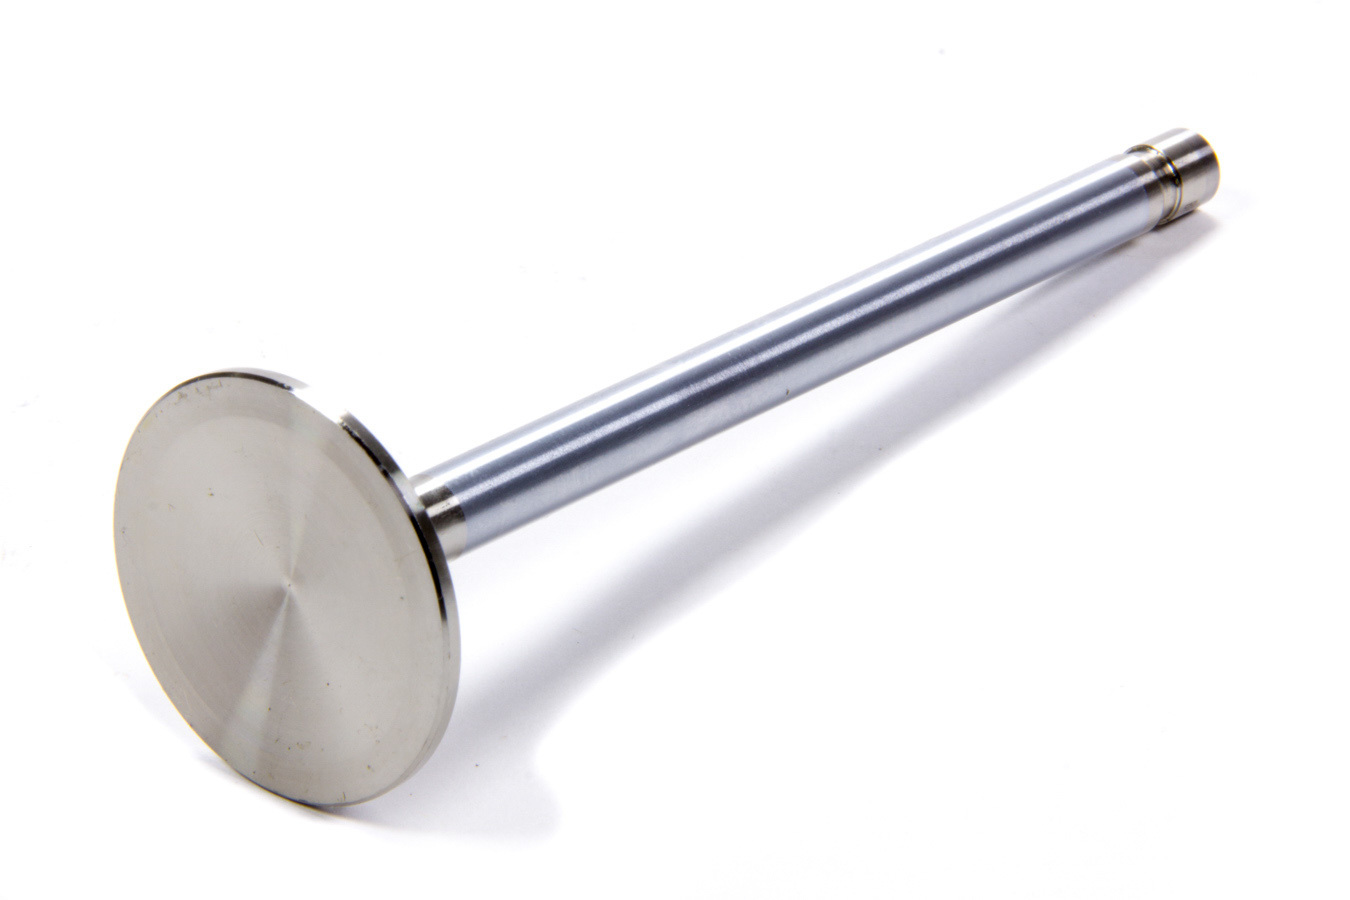 Brodix BR81685 Exhaust Valve, 1.860 in Head, 11/32 in Valve Stem, 6.550 in Long, Stainless, Big Block Chevy, Each